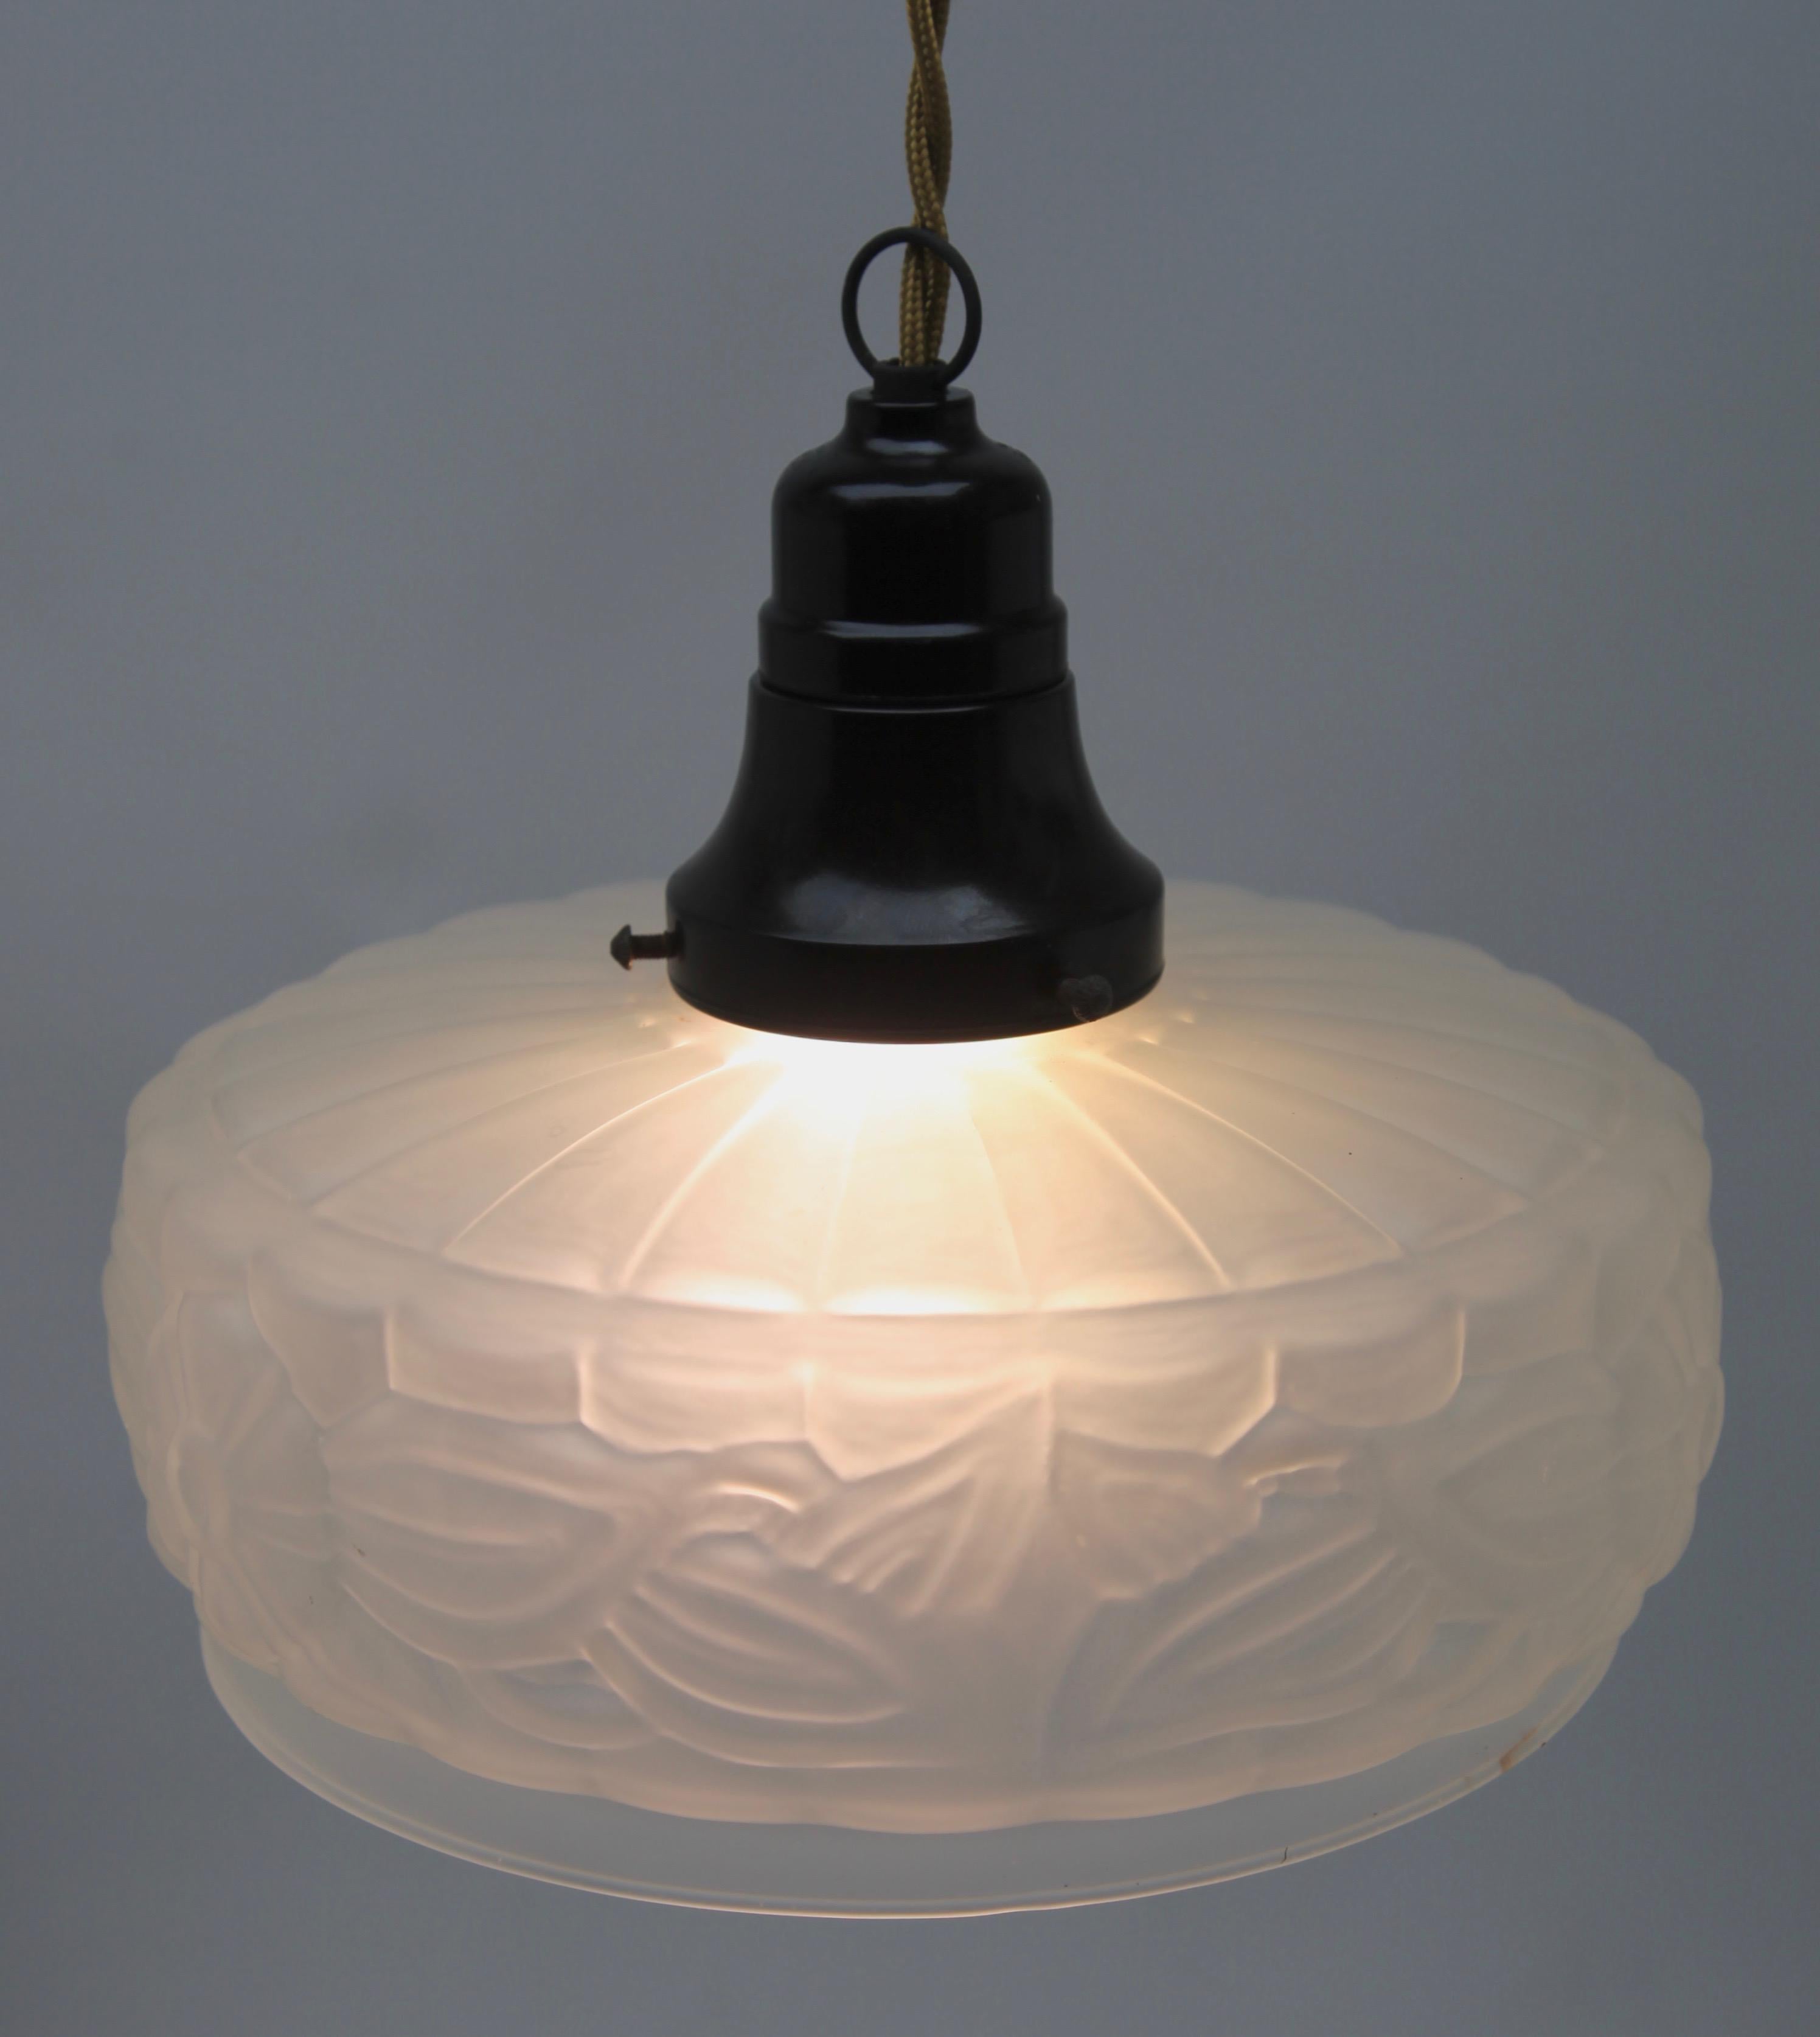 Art Nouveau ceiling lamp

Photography fails to capture the simple elegant illumination provided by this lamp.

Fitting Bakelit pendant ceiling light with screw fixing to hold a stylish Belgian Art Deco lampshade. Good distribution of darker and